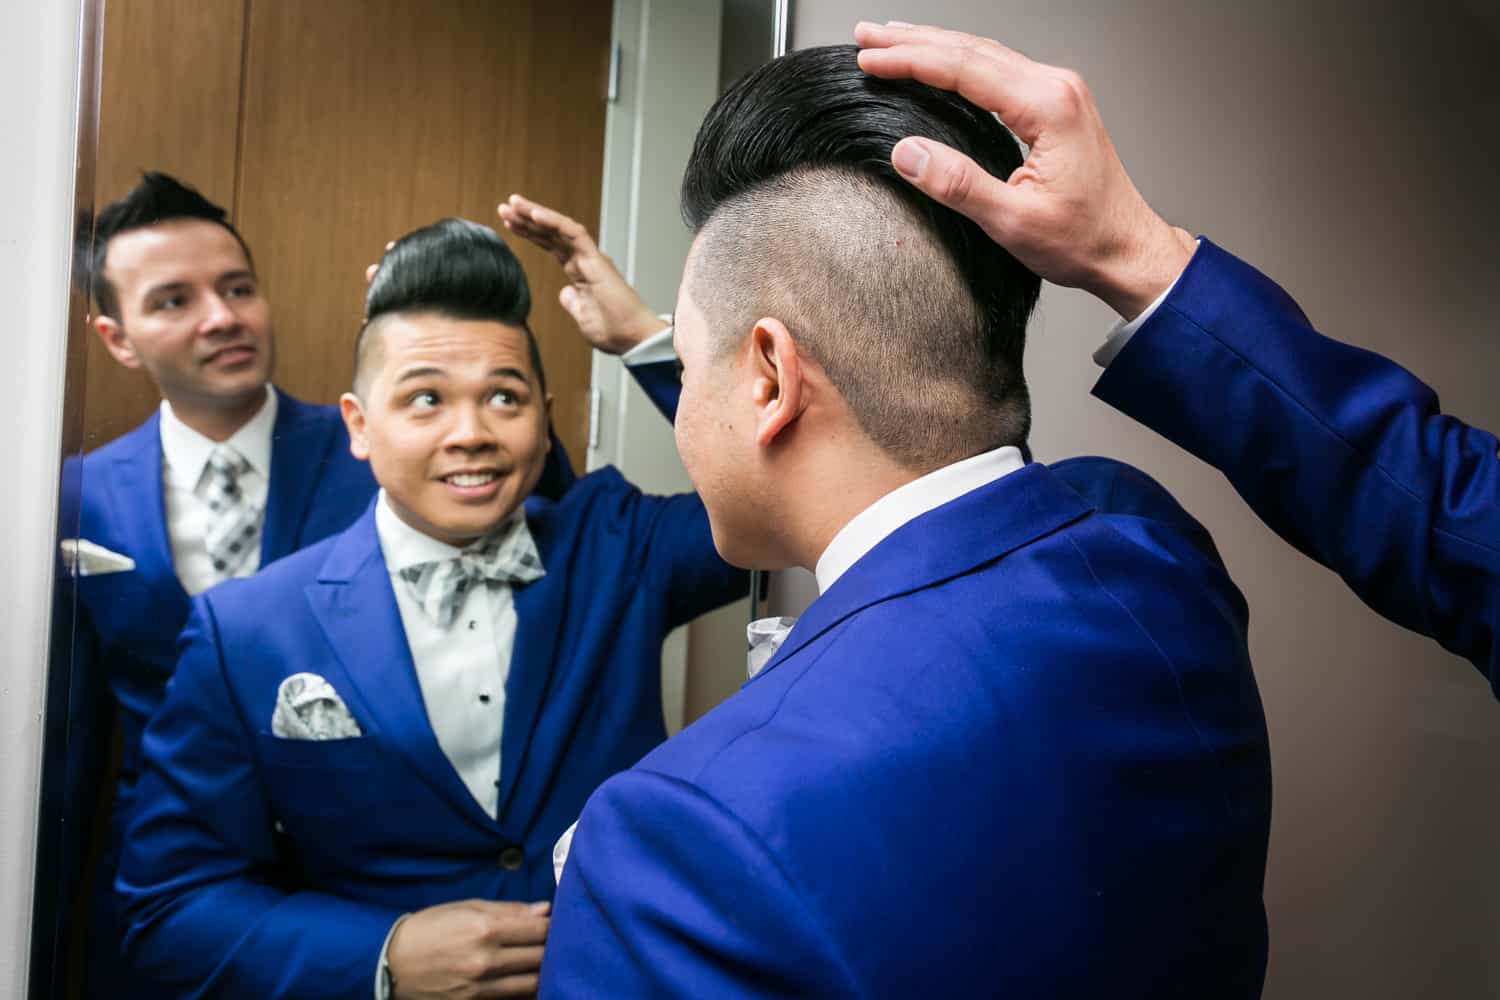 Two grooms looking in mirror and one groom touching the other's hair